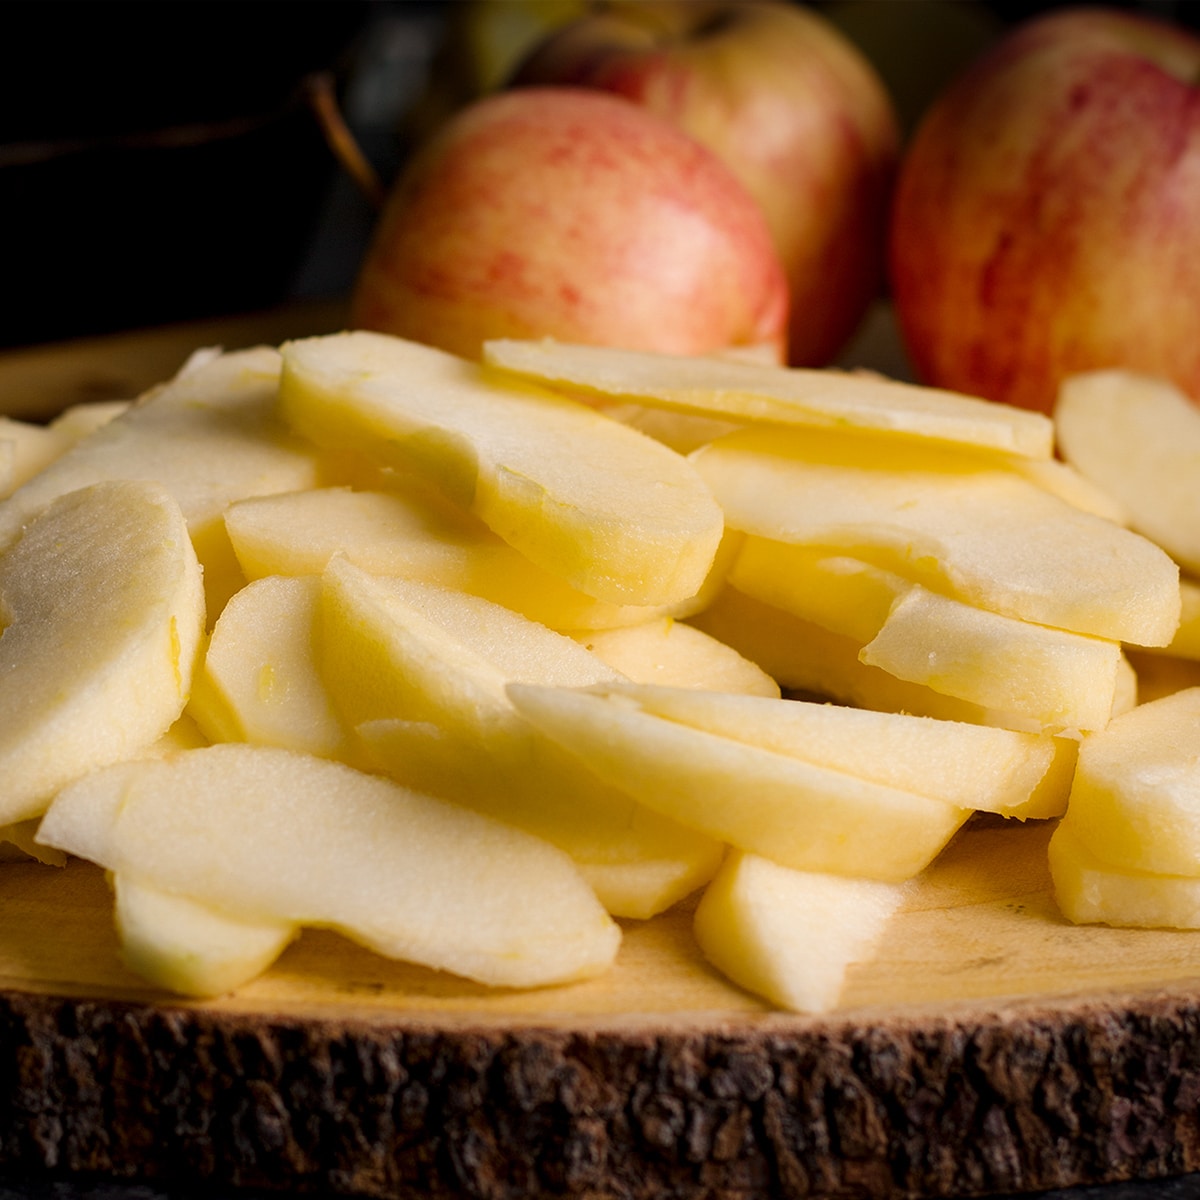 A pile of sliced apples on a wood cutting board.